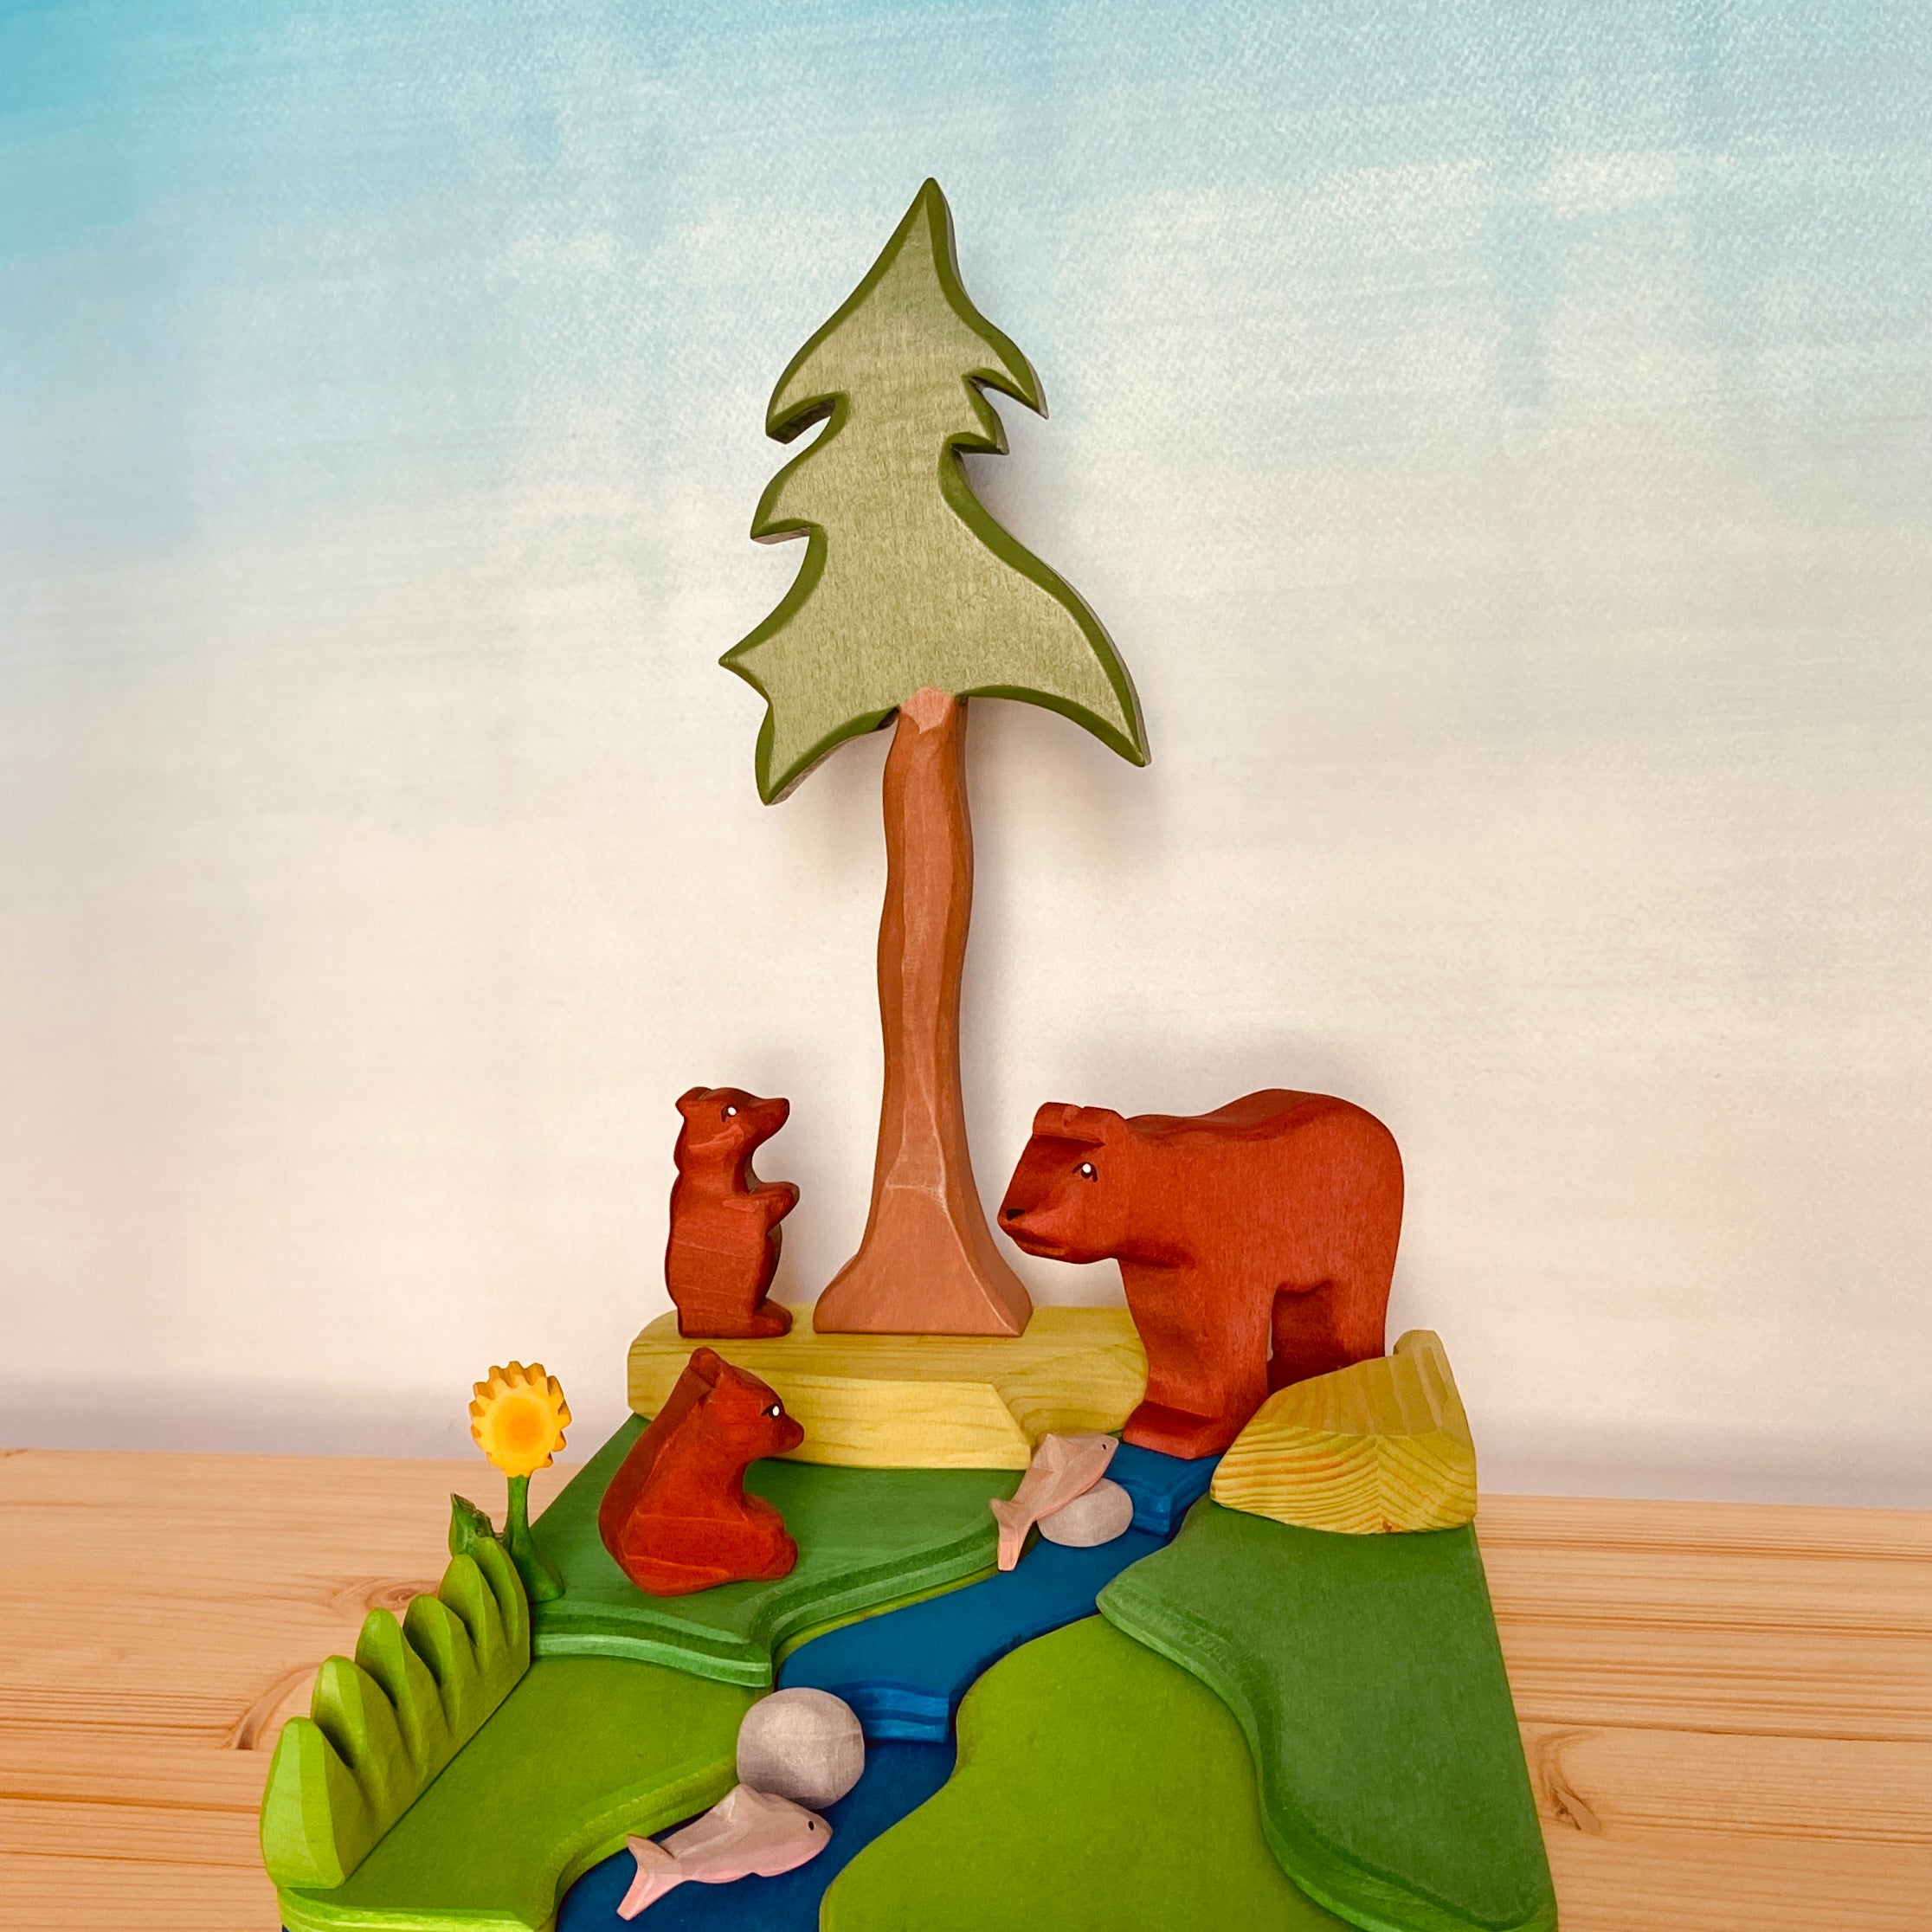 Waldorf toys - The River Diorama  Open ended toys – Vulp's Wooden Toys